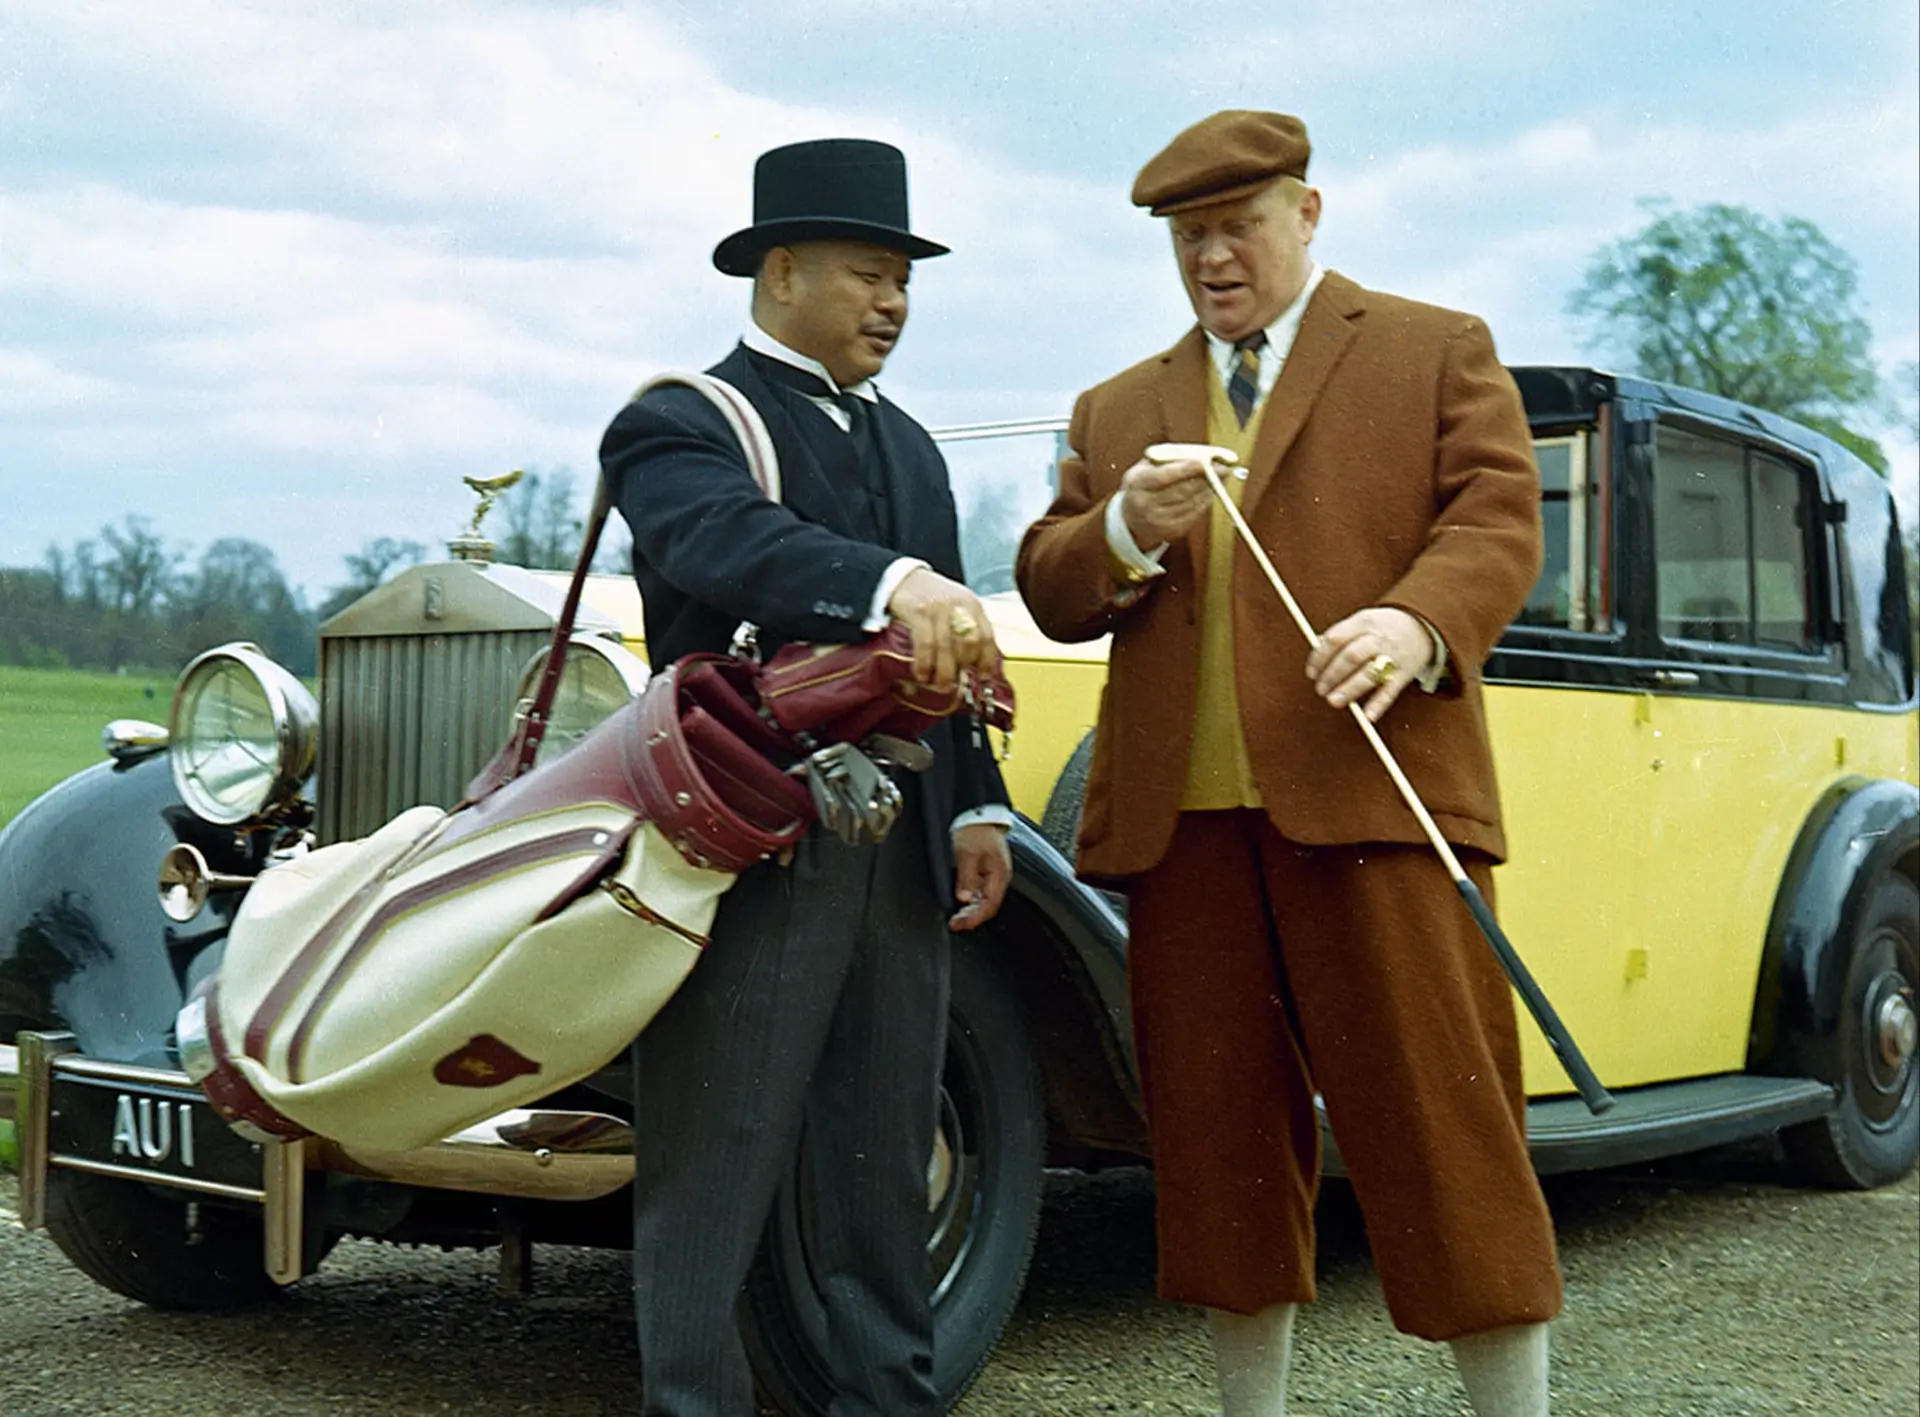 Goldfinger and Oddjob wearing suits holding golf clubs next to a yellow Rolls Royce car